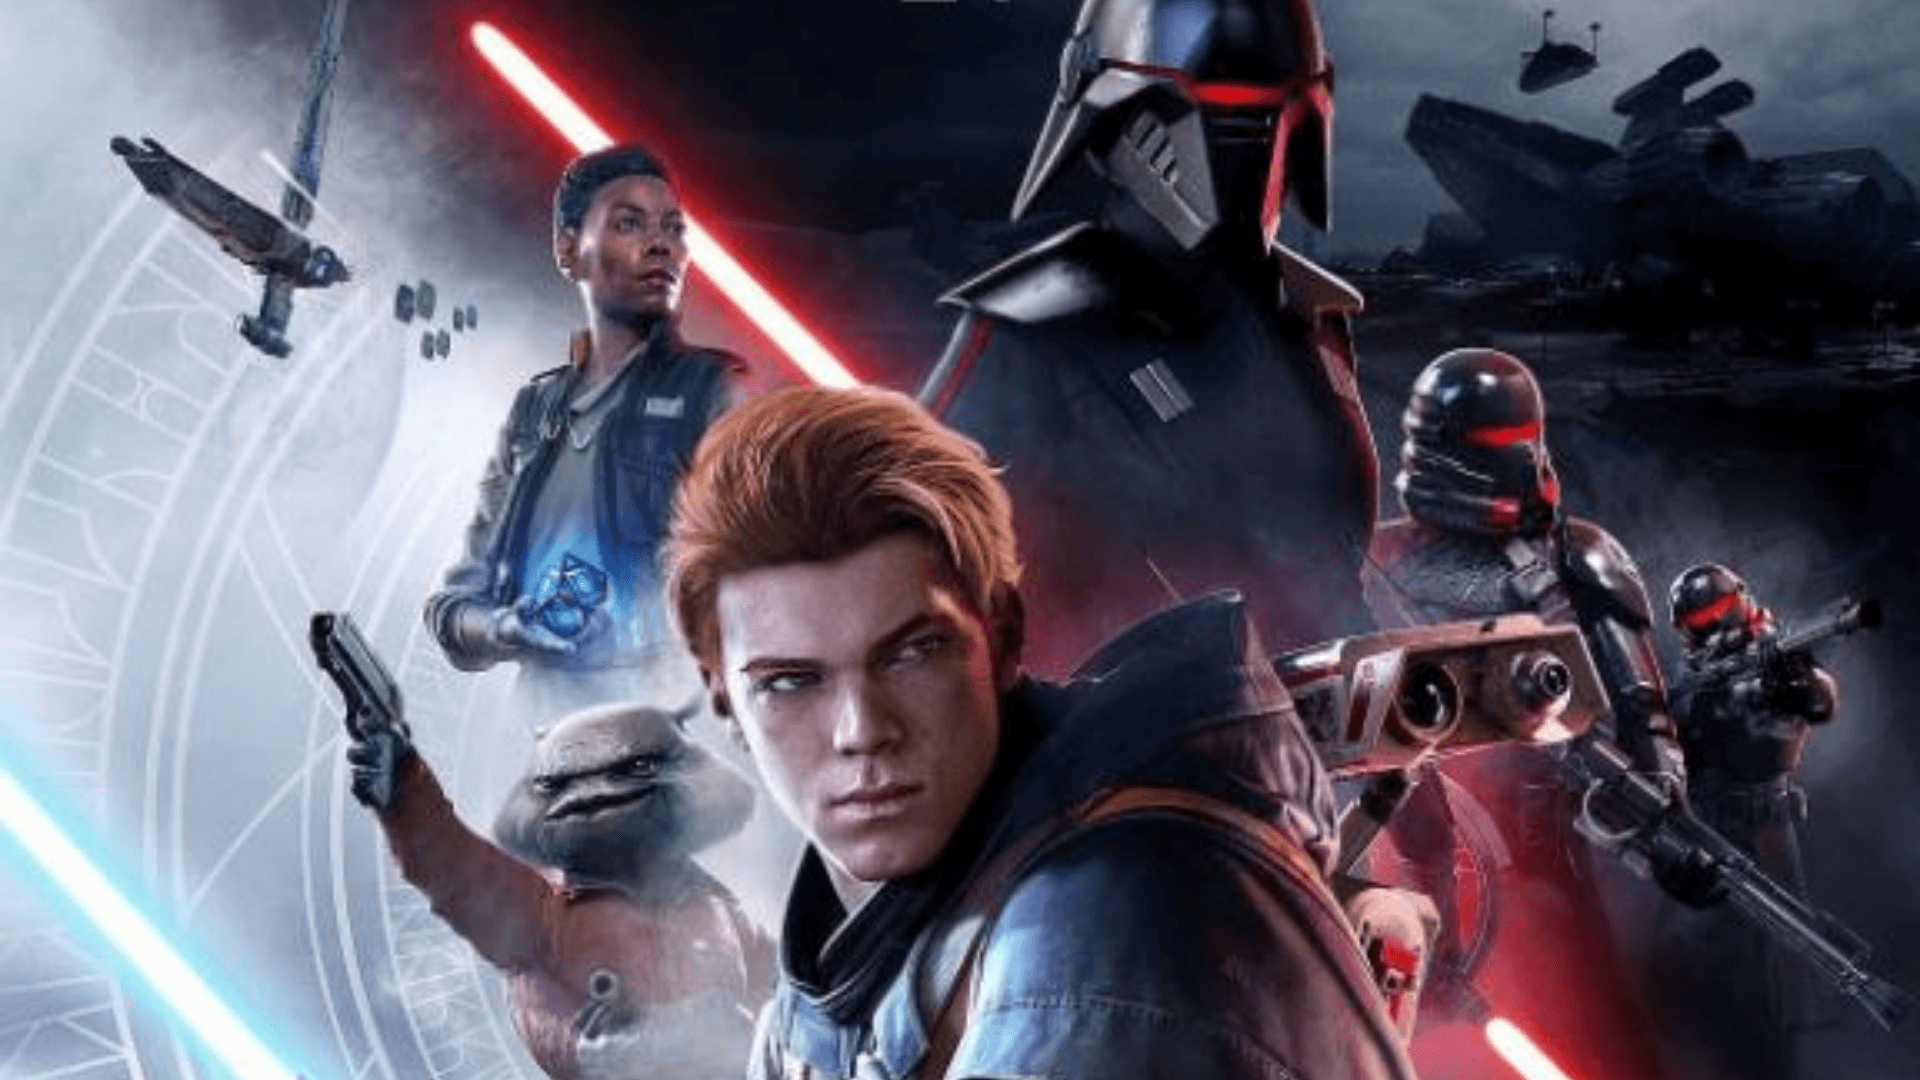 Star Wars Games Are On Big Sale For May 4th: What To Get